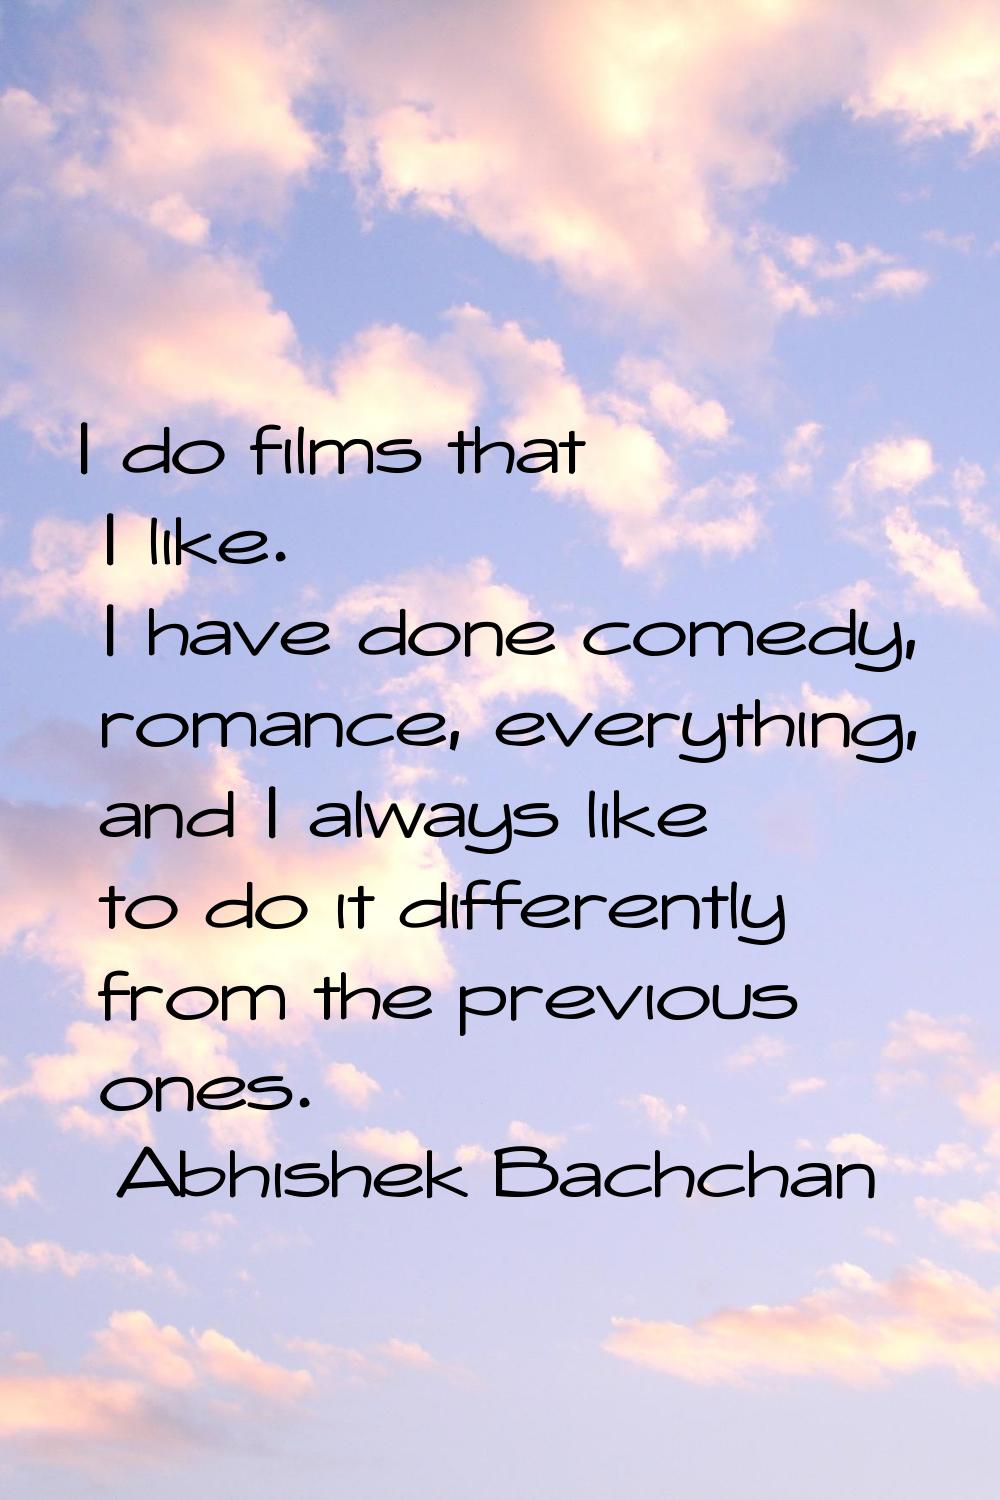 I do films that I like. I have done comedy, romance, everything, and I always like to do it differe